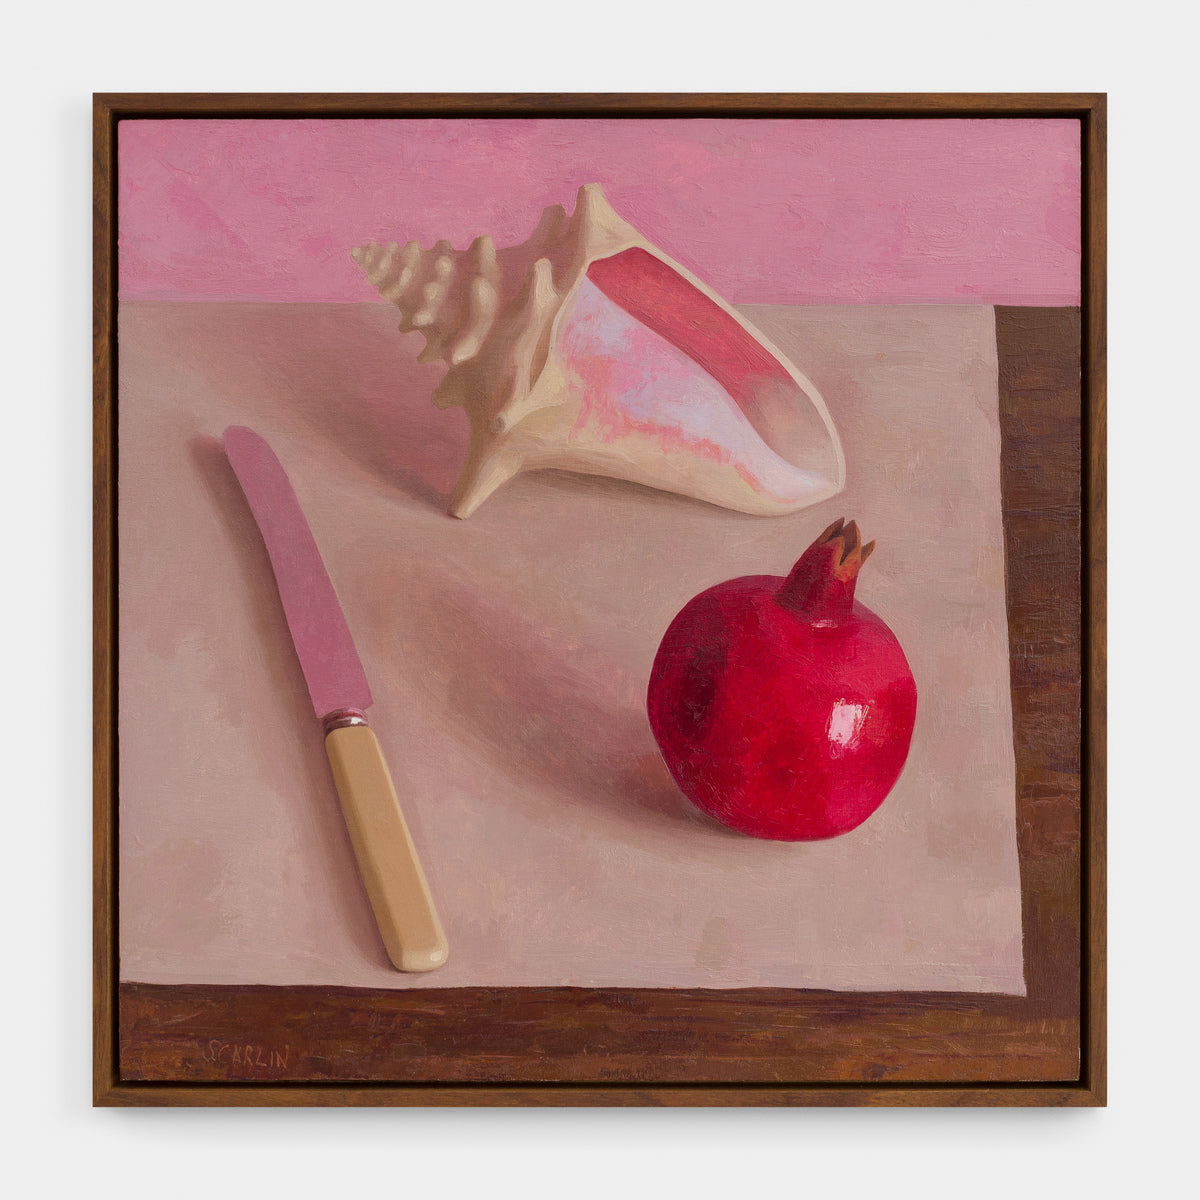 Pomegranate, Shell and Knife